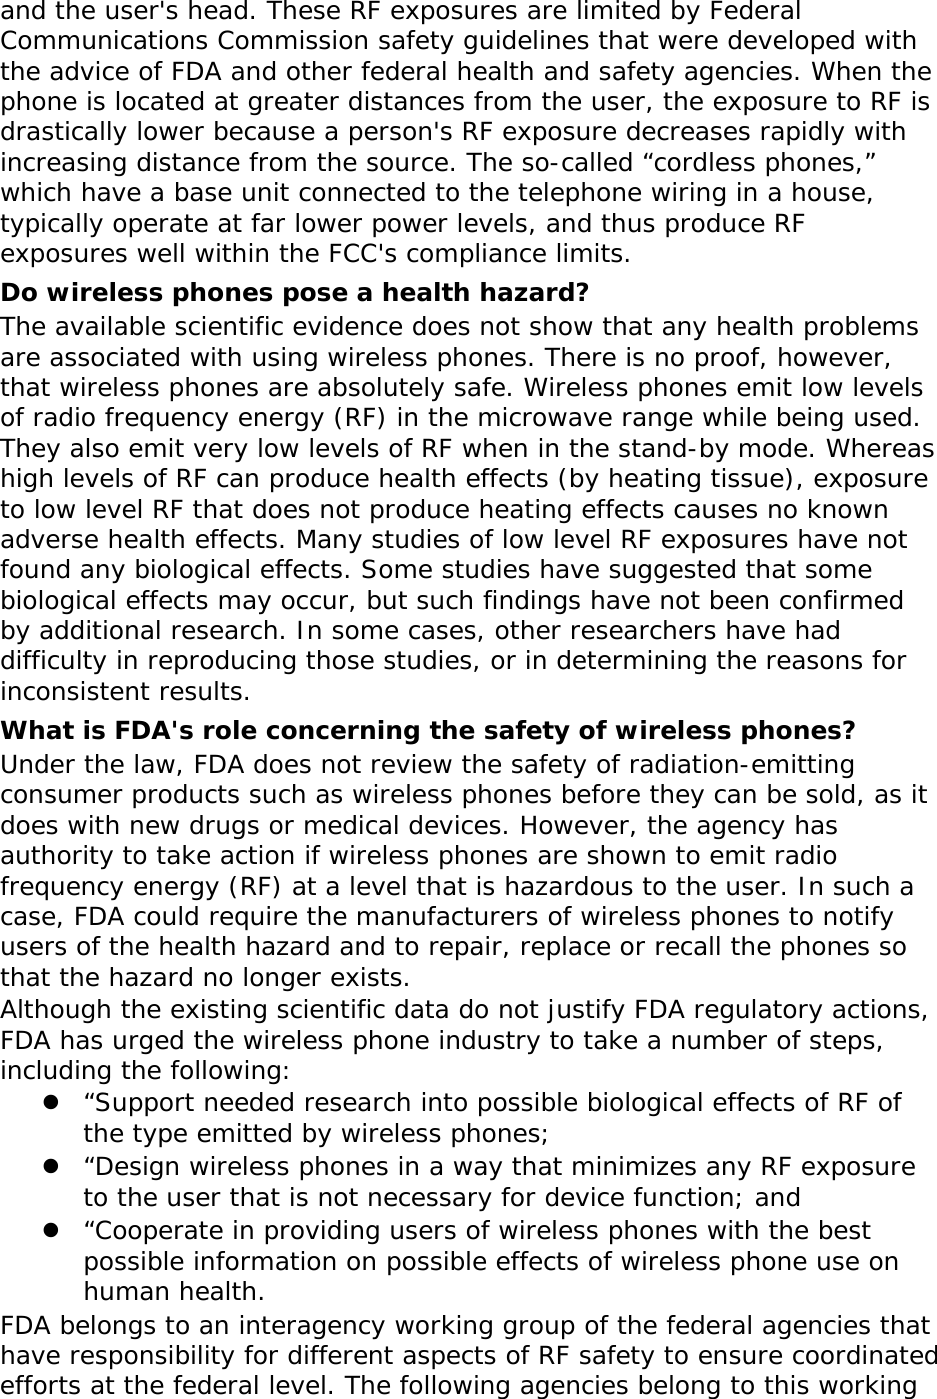   and the user&apos;s head. These RF exposures are limited by Federal Communications Commission safety guidelines that were developed with the advice of FDA and other federal health and safety agencies. When the phone is located at greater distances from the user, the exposure to RF is drastically lower because a person&apos;s RF exposure decreases rapidly with increasing distance from the source. The so-called “cordless phones,” which have a base unit connected to the telephone wiring in a house, typically operate at far lower power levels, and thus produce RF exposures well within the FCC&apos;s compliance limits. Do wireless phones pose a health hazard? The available scientific evidence does not show that any health problems are associated with using wireless phones. There is no proof, however, that wireless phones are absolutely safe. Wireless phones emit low levels of radio frequency energy (RF) in the microwave range while being used. They also emit very low levels of RF when in the stand-by mode. Whereas high levels of RF can produce health effects (by heating tissue), exposure to low level RF that does not produce heating effects causes no known adverse health effects. Many studies of low level RF exposures have not found any biological effects. Some studies have suggested that some biological effects may occur, but such findings have not been confirmed by additional research. In some cases, other researchers have had difficulty in reproducing those studies, or in determining the reasons for inconsistent results. What is FDA&apos;s role concerning the safety of wireless phones? Under the law, FDA does not review the safety of radiation-emitting consumer products such as wireless phones before they can be sold, as it does with new drugs or medical devices. However, the agency has authority to take action if wireless phones are shown to emit radio frequency energy (RF) at a level that is hazardous to the user. In such a case, FDA could require the manufacturers of wireless phones to notify users of the health hazard and to repair, replace or recall the phones so that the hazard no longer exists. Although the existing scientific data do not justify FDA regulatory actions, FDA has urged the wireless phone industry to take a number of steps, including the following:  “Support needed research into possible biological effects of RF of the type emitted by wireless phones;  “Design wireless phones in a way that minimizes any RF exposure to the user that is not necessary for device function; and  “Cooperate in providing users of wireless phones with the best possible information on possible effects of wireless phone use on human health. FDA belongs to an interagency working group of the federal agencies that have responsibility for different aspects of RF safety to ensure coordinated efforts at the federal level. The following agencies belong to this working 